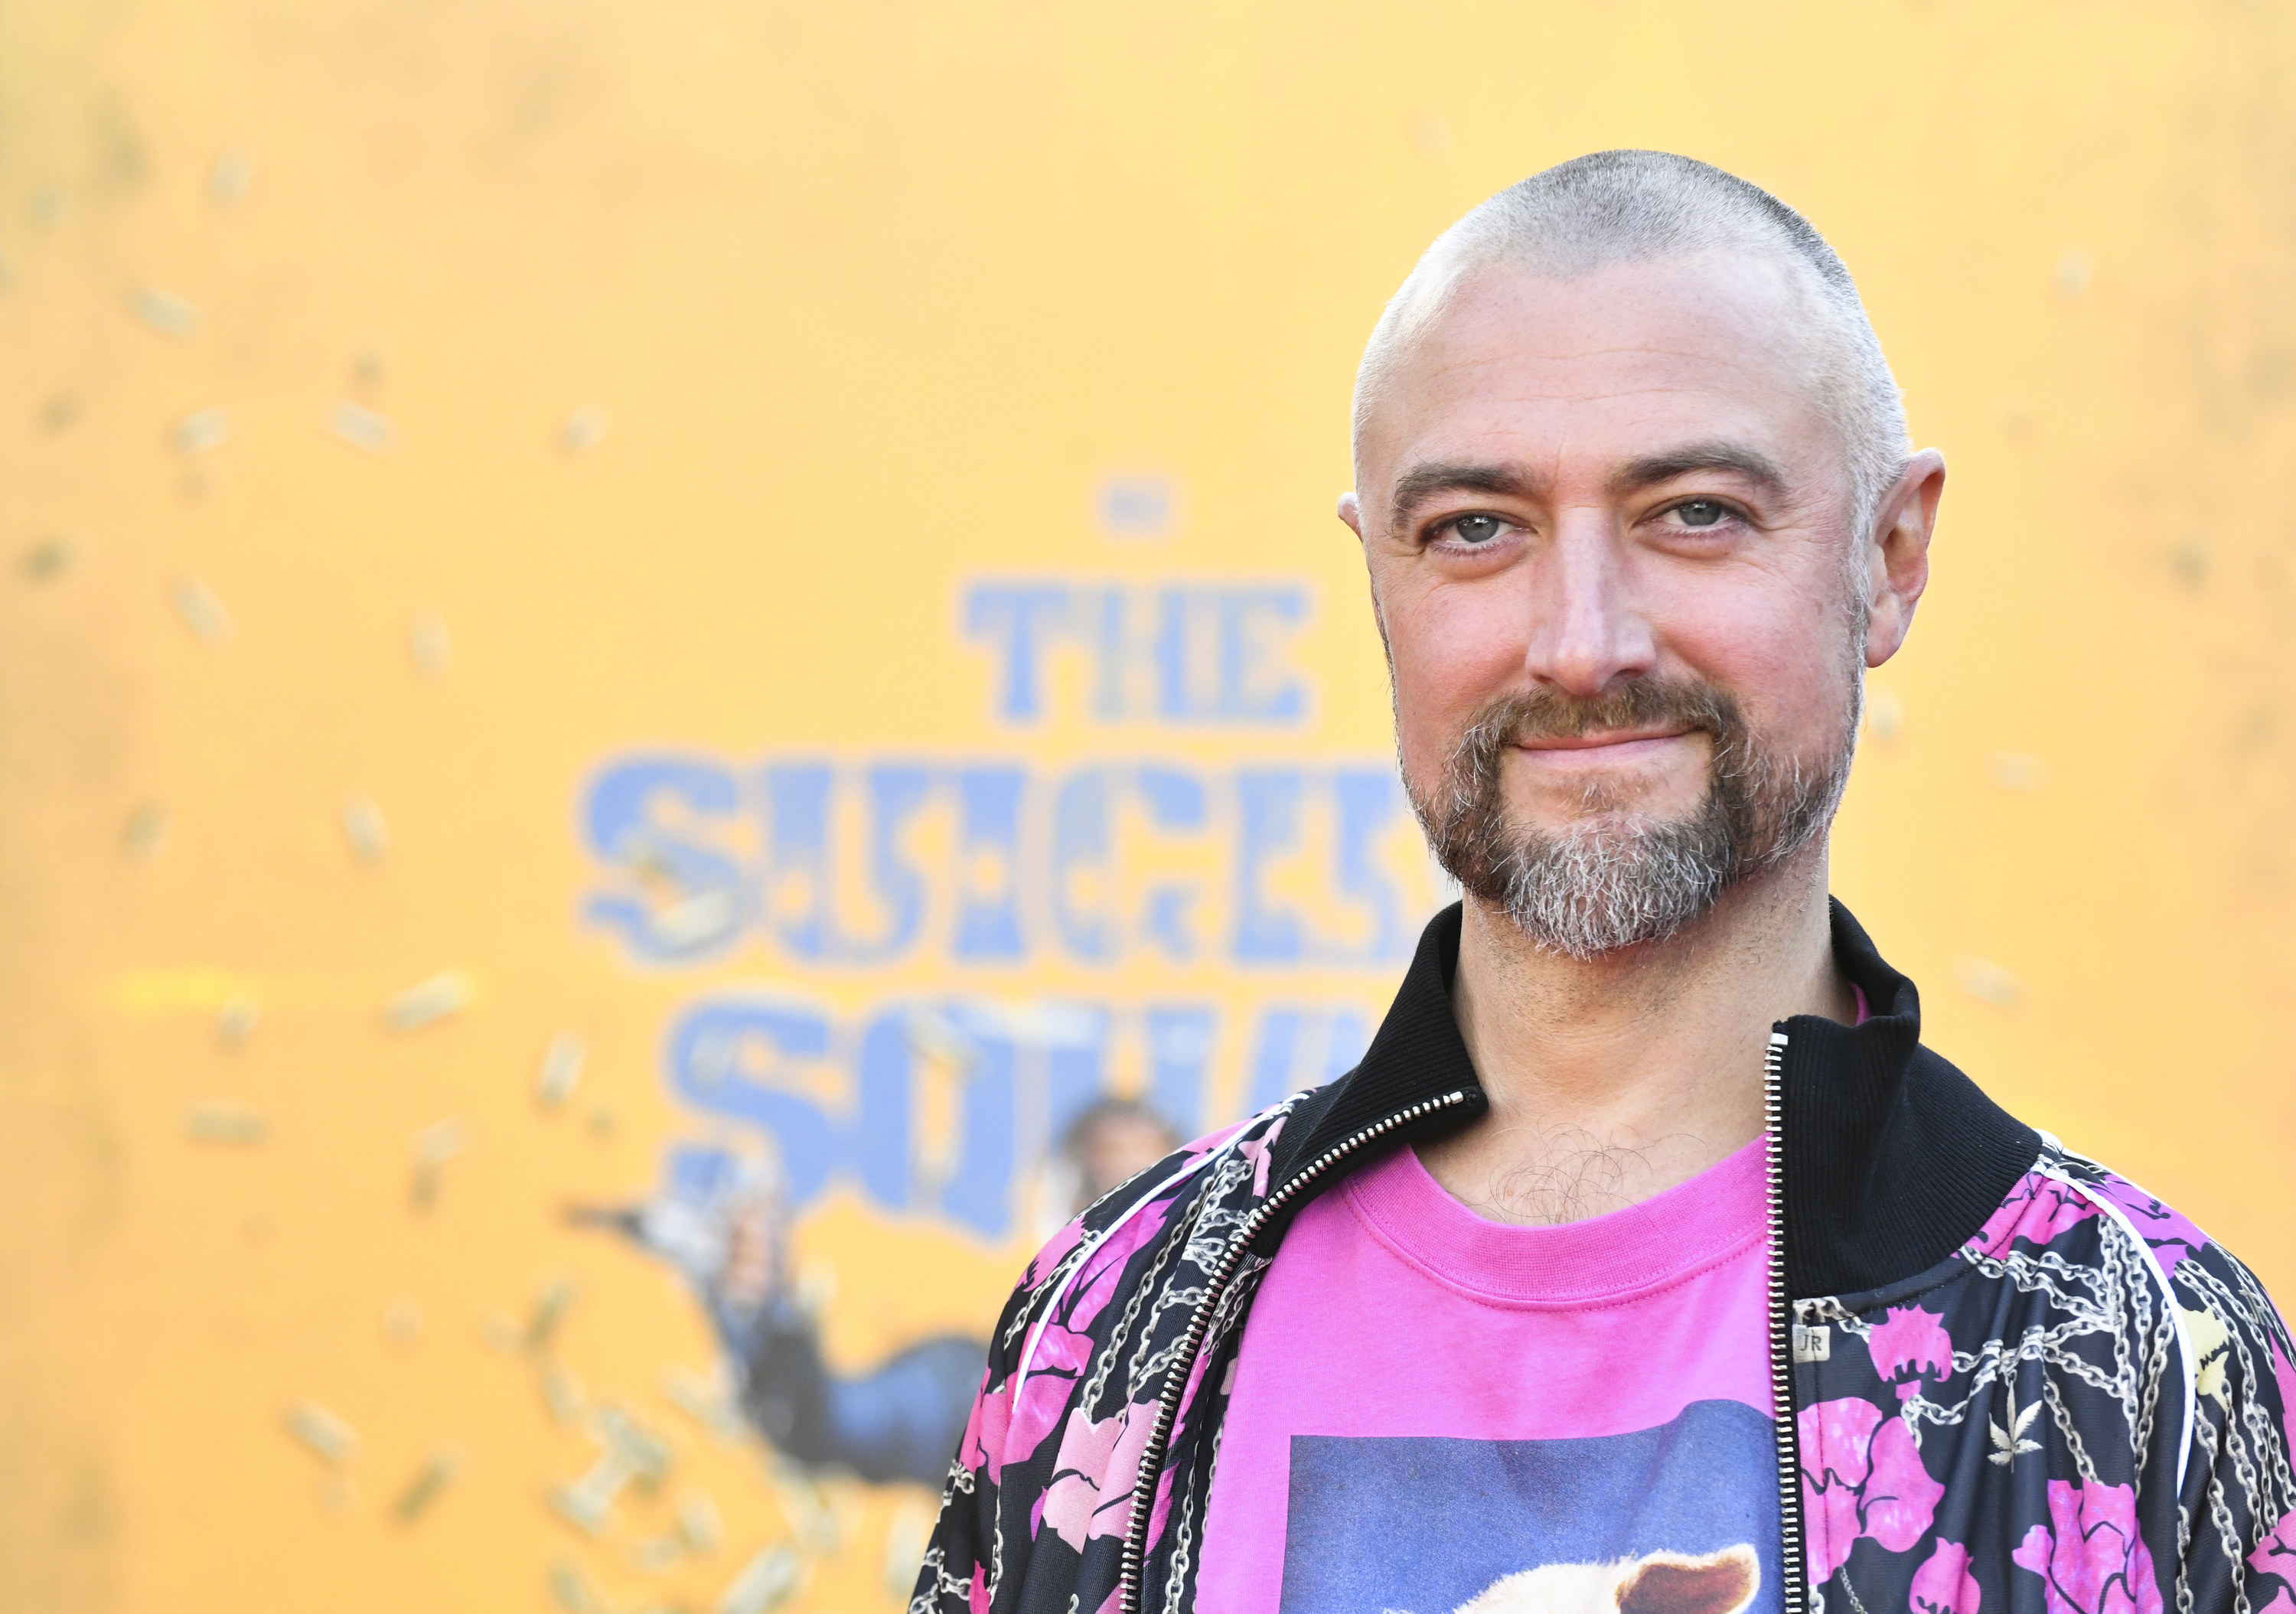 Sean smiling, wearing a bright pink t-shirt with a black jacket with bright pink details over the top